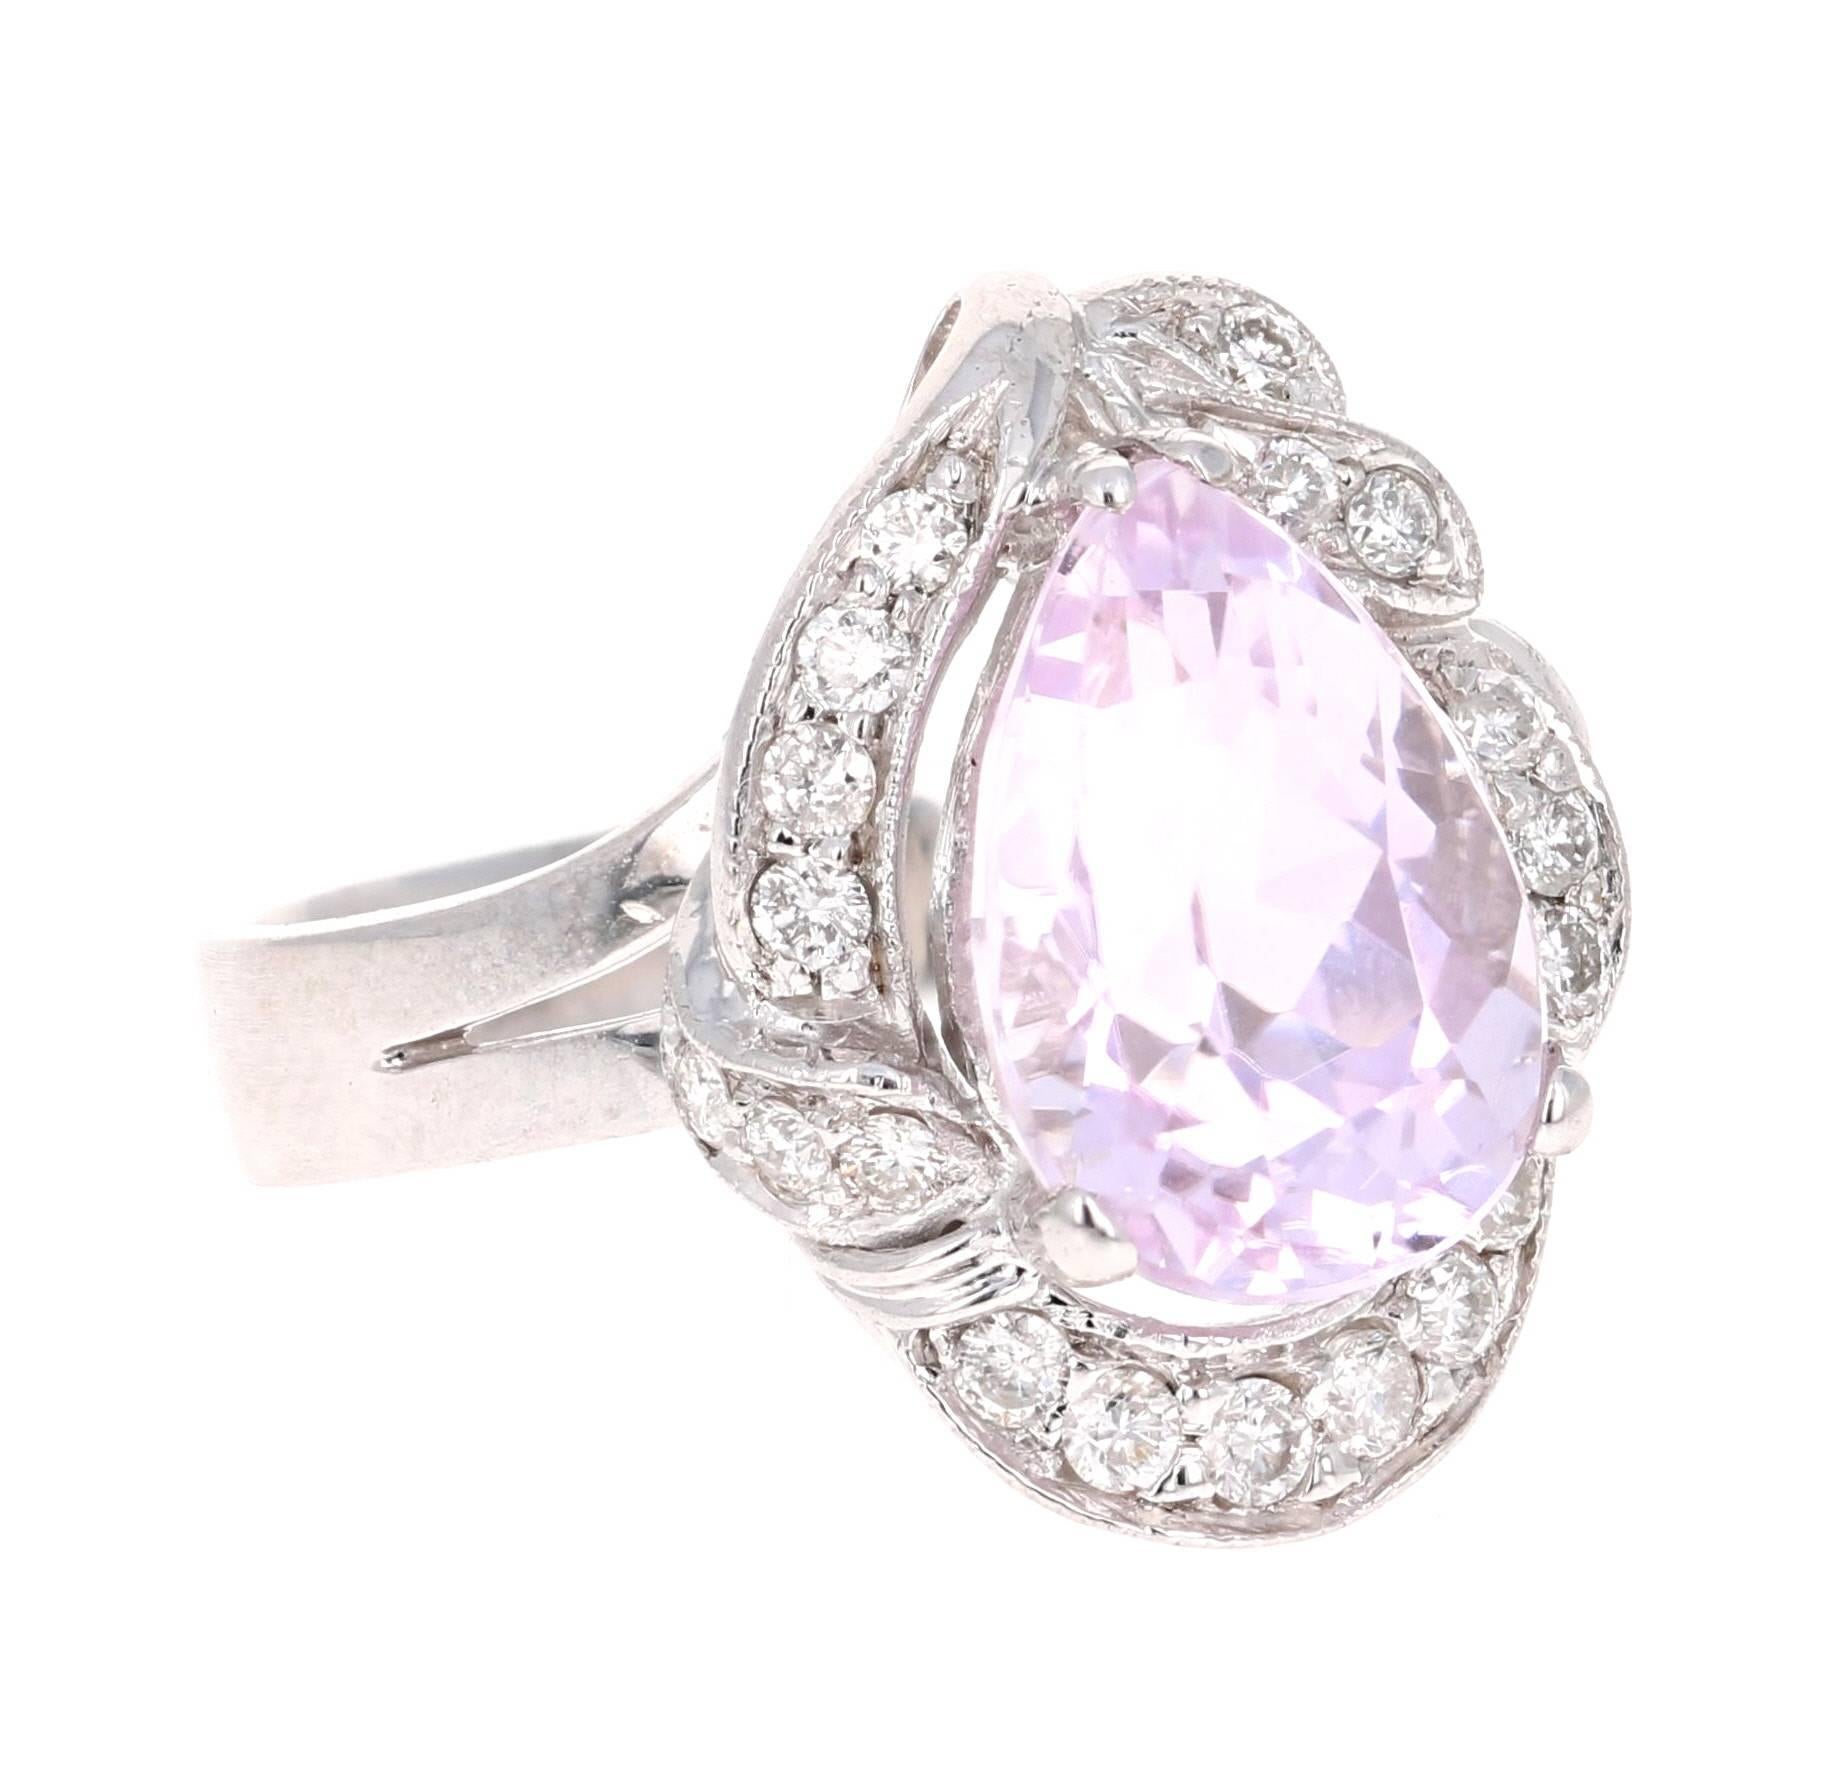 This beautiful piece has a 3.94 carat Pear Cut Kunzite that is set in the center of the ring, it is surrounded by 17 Round Cut Diamonds that weigh 0.38 carats.  The total carat weight of the ring is 4.32 carats. 

The ring is made in 14K White Gold